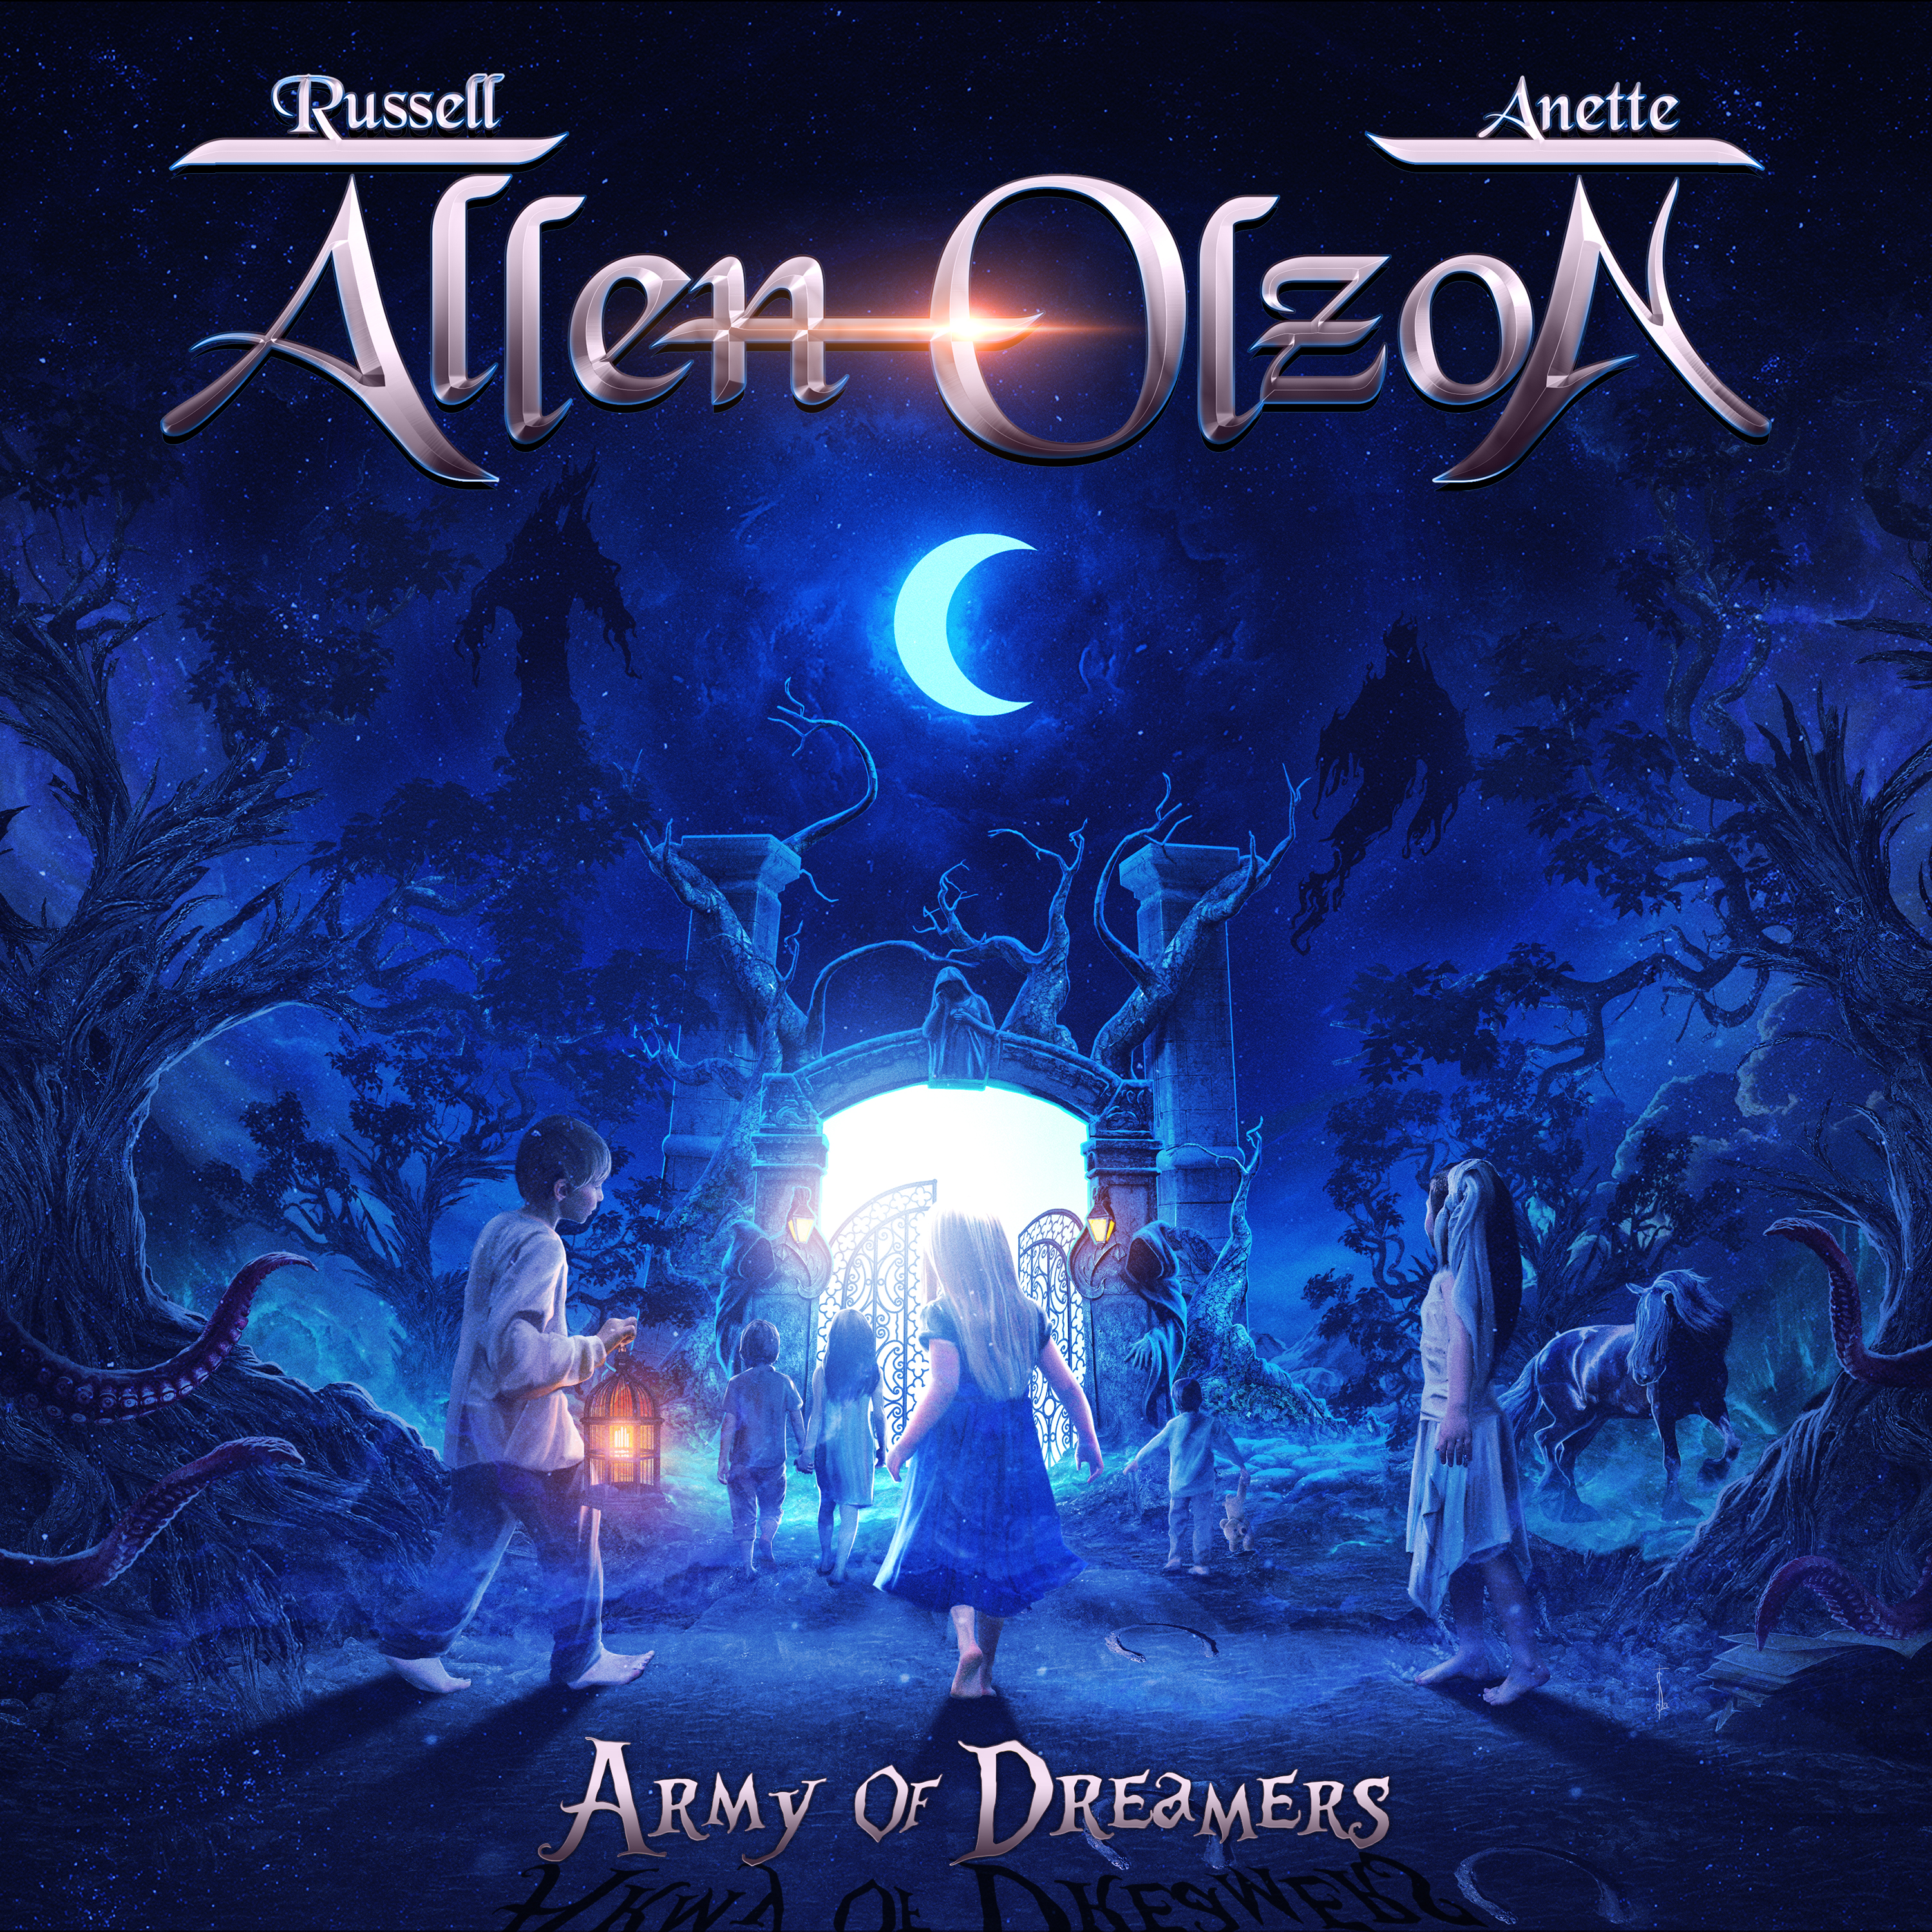 Allen/Olzon - Army Of Dreamers - CD